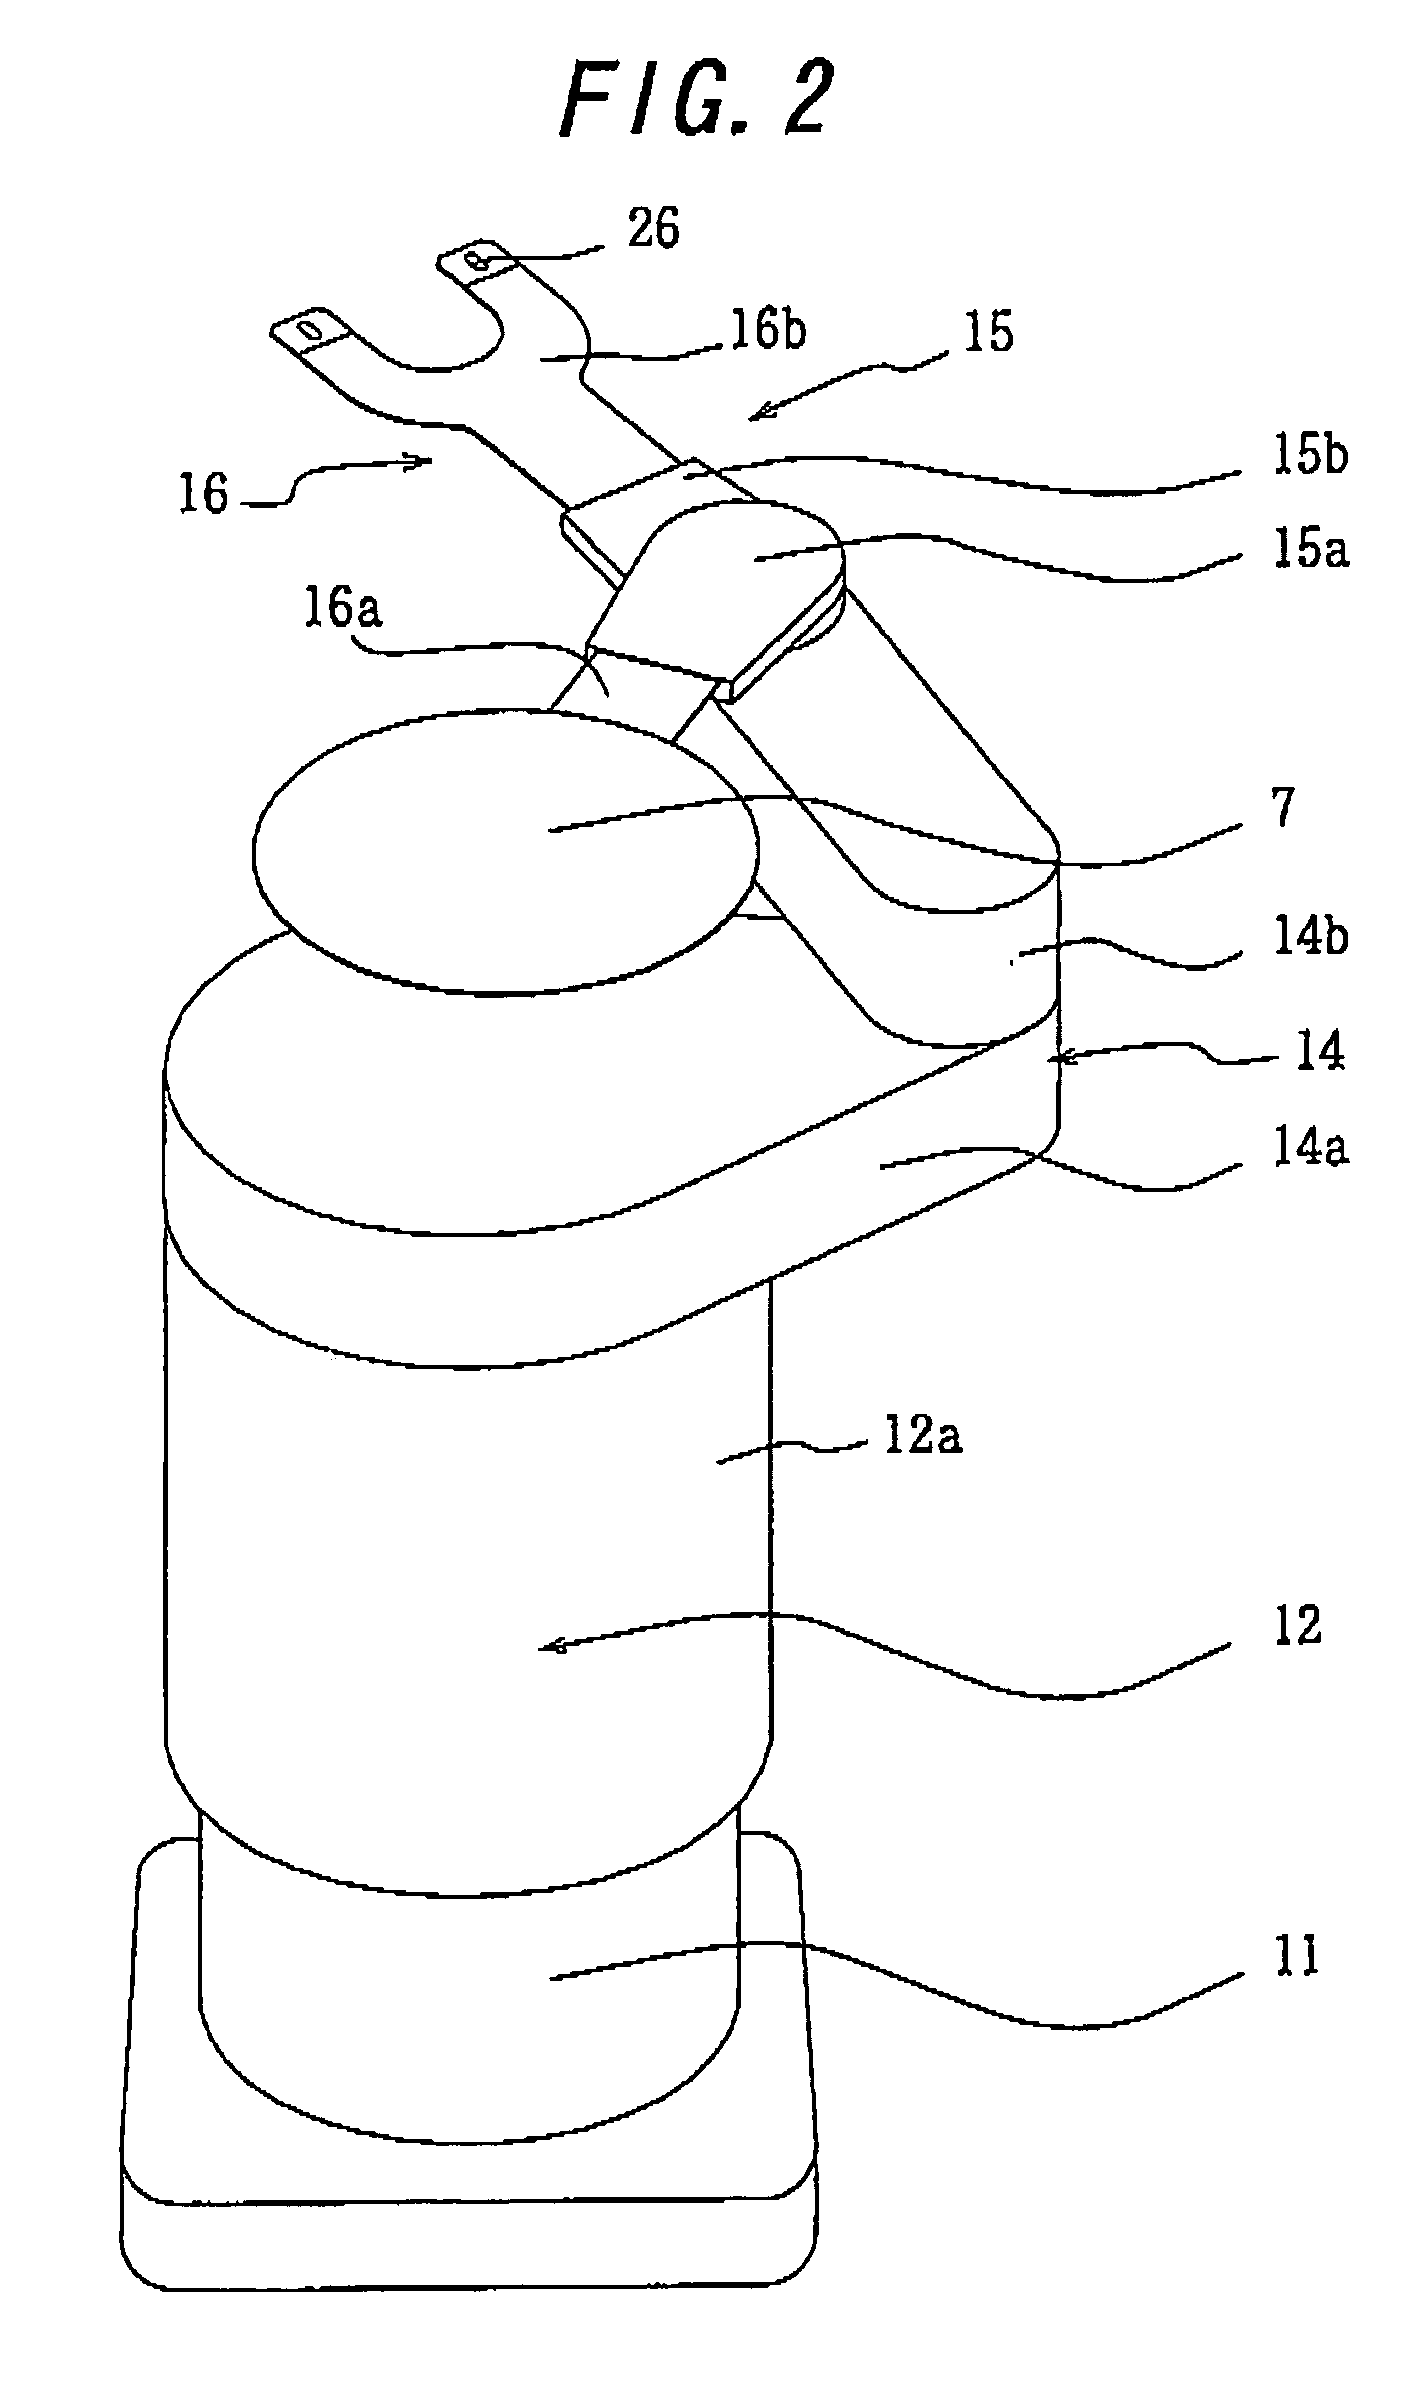 Scalar type robot for carrying flat plate-like object, and flat plate-like object processing system